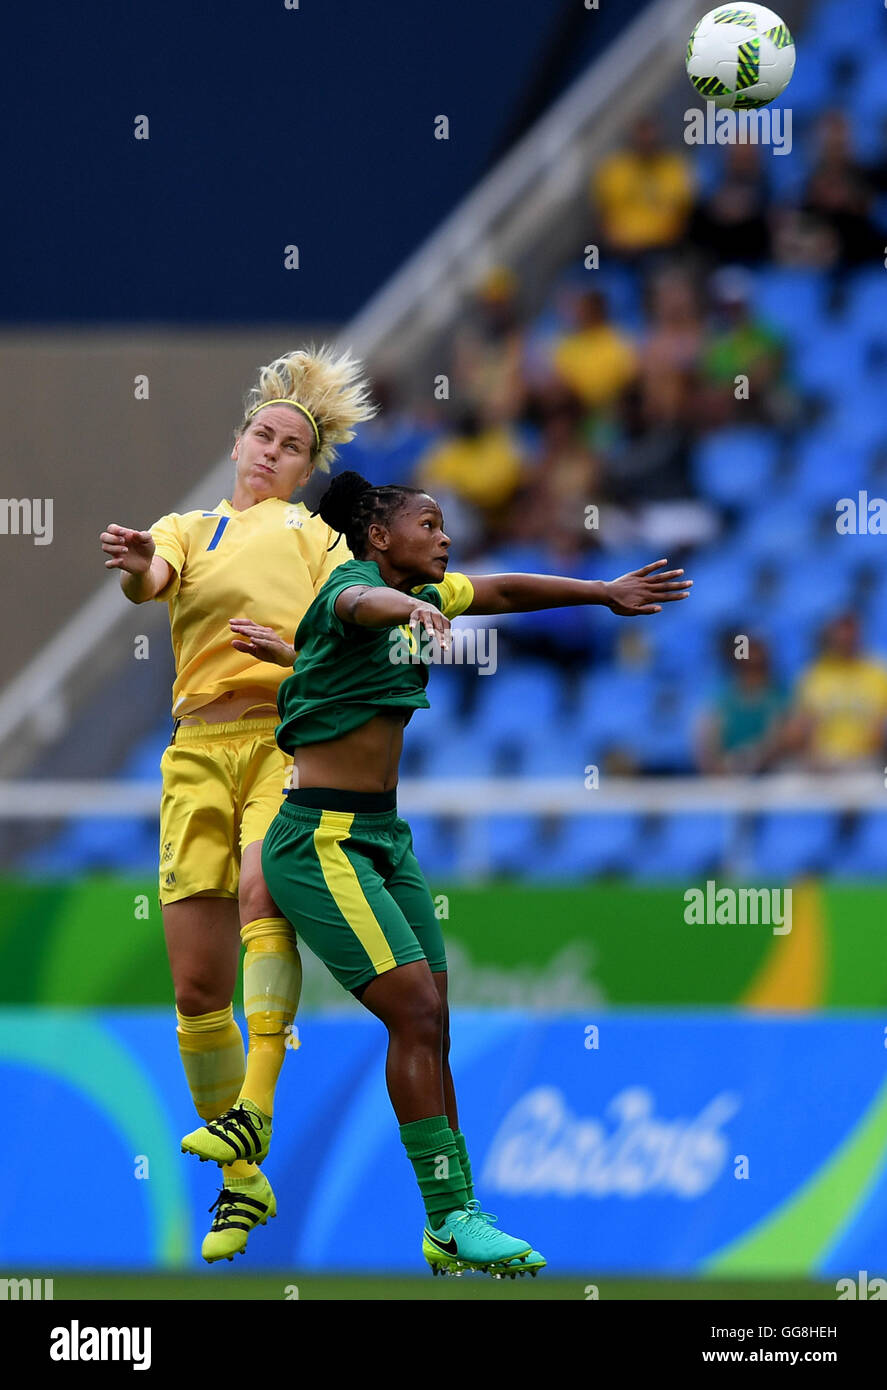 Rio De Janeiro, Brazil. 3rd Aug, 2016. Dahlkvist Lisa of Sweden (L) vies with Dlamini Amanada of South Africa during the opening match of the women's Olympic football competitions between South Africa and Sweden at the Olympic Stadium in Rio de Janeiro, Brazil, Aug. 3, 2016. Sweden won 1-0. © Lin Yiguang/Xinhua/Alamy Live News Stock Photo